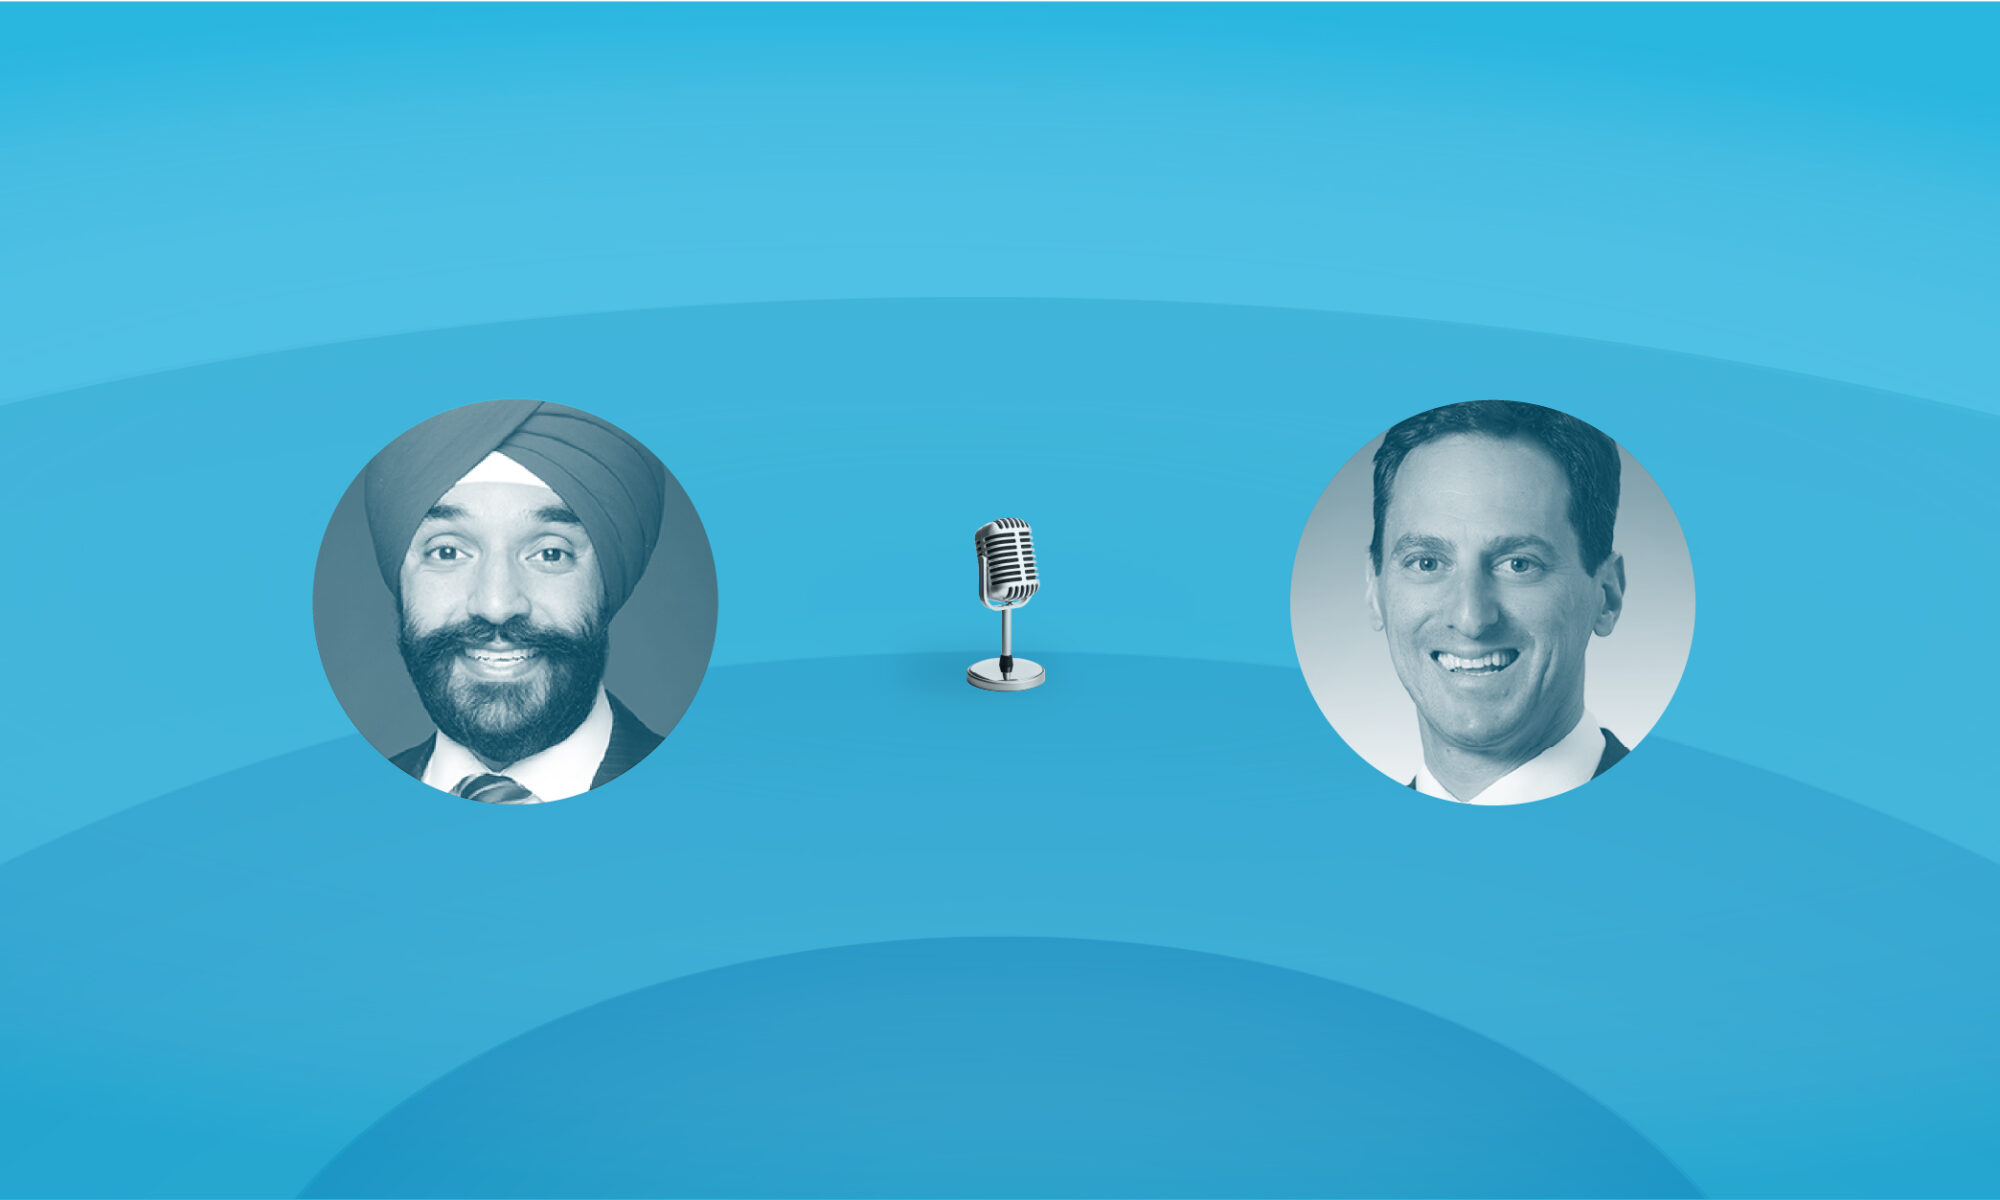 Headshots of Dan Goldberg, President and CEO of Telesat and the Honourable Navdeep Bains, former Minister of Innovation, Science and Economic Development against a blue background